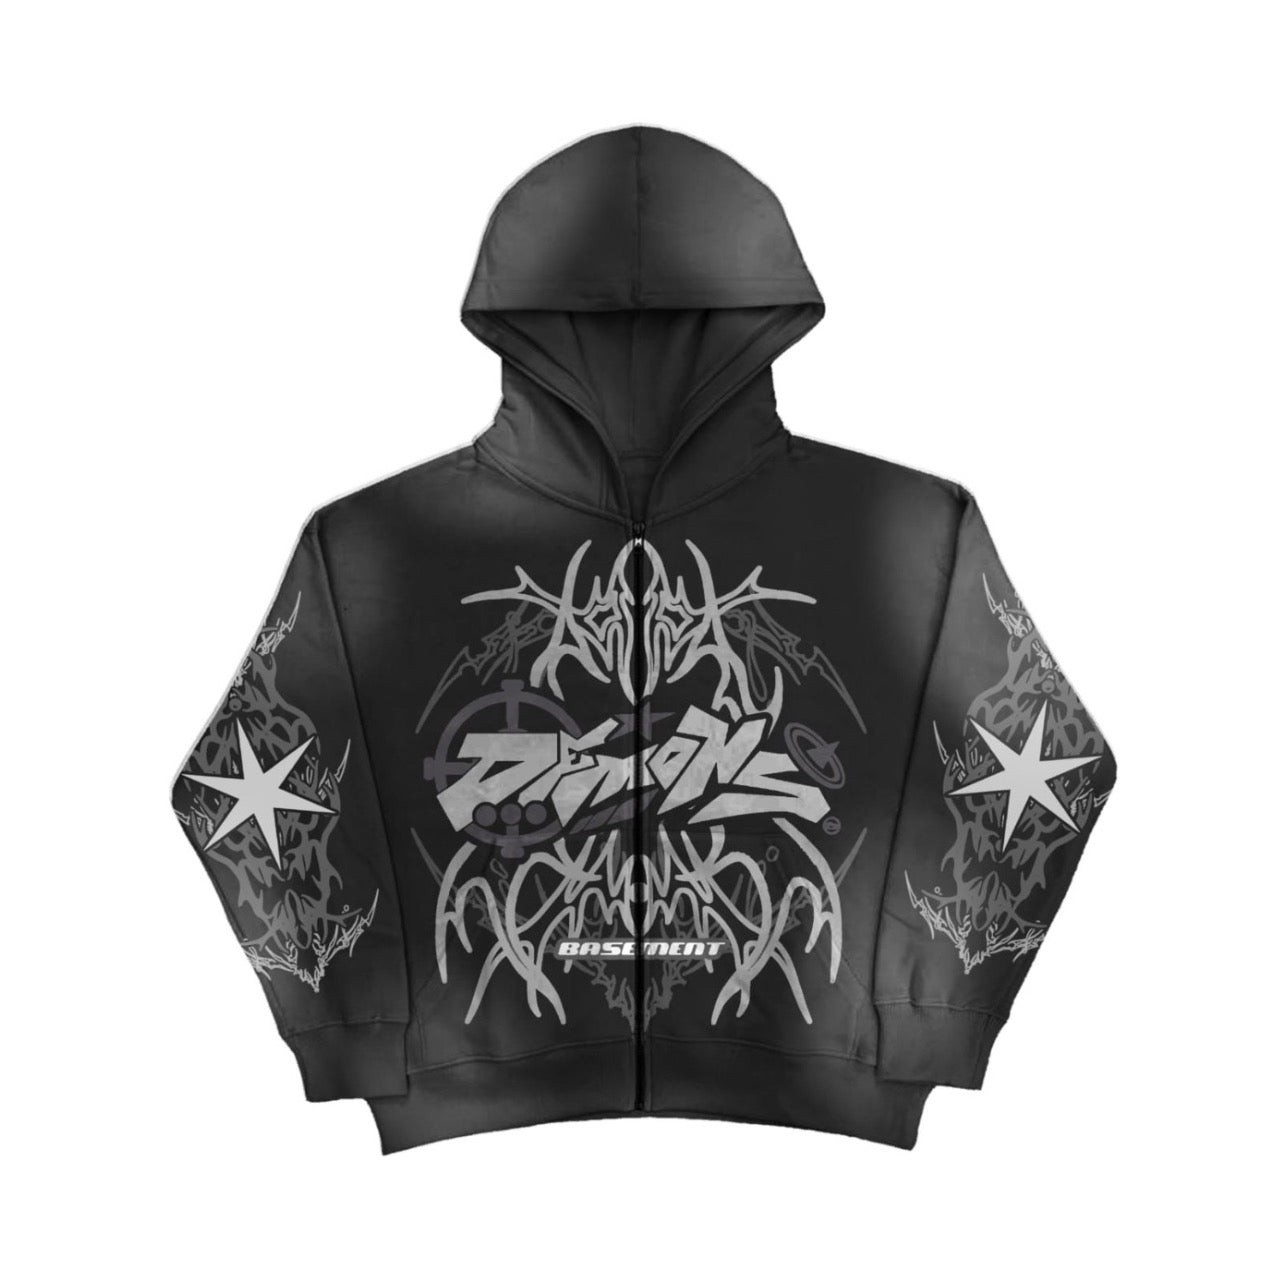 "The Lost World" Revived Logo Zip - Up Jacket